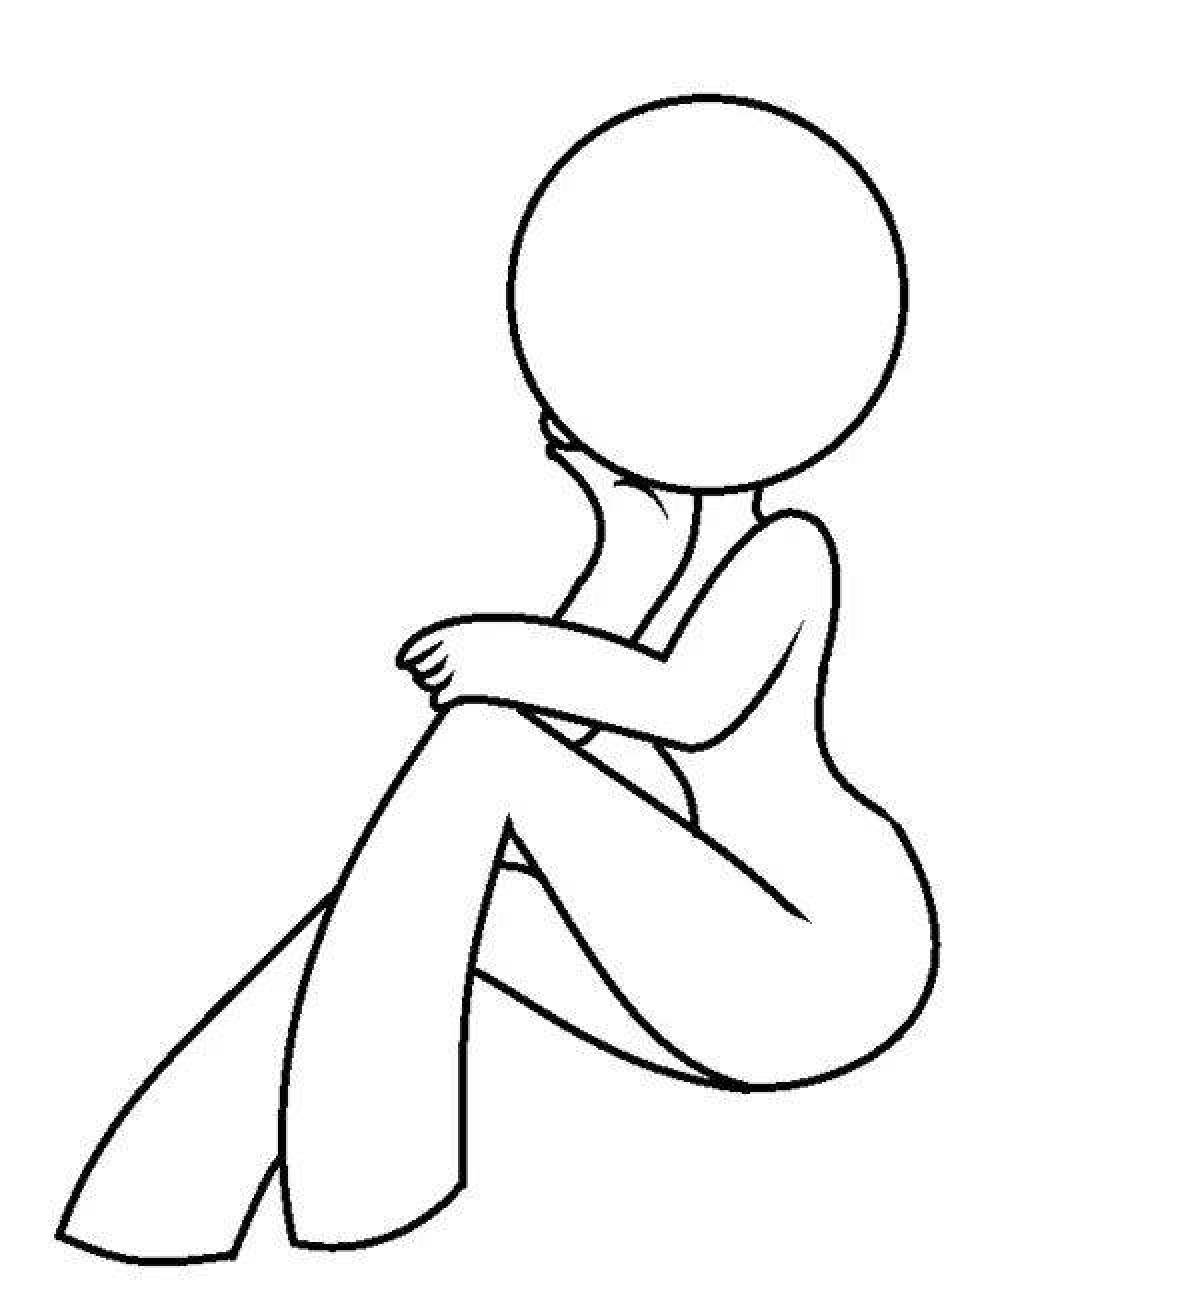 Shiny anime body coloring page